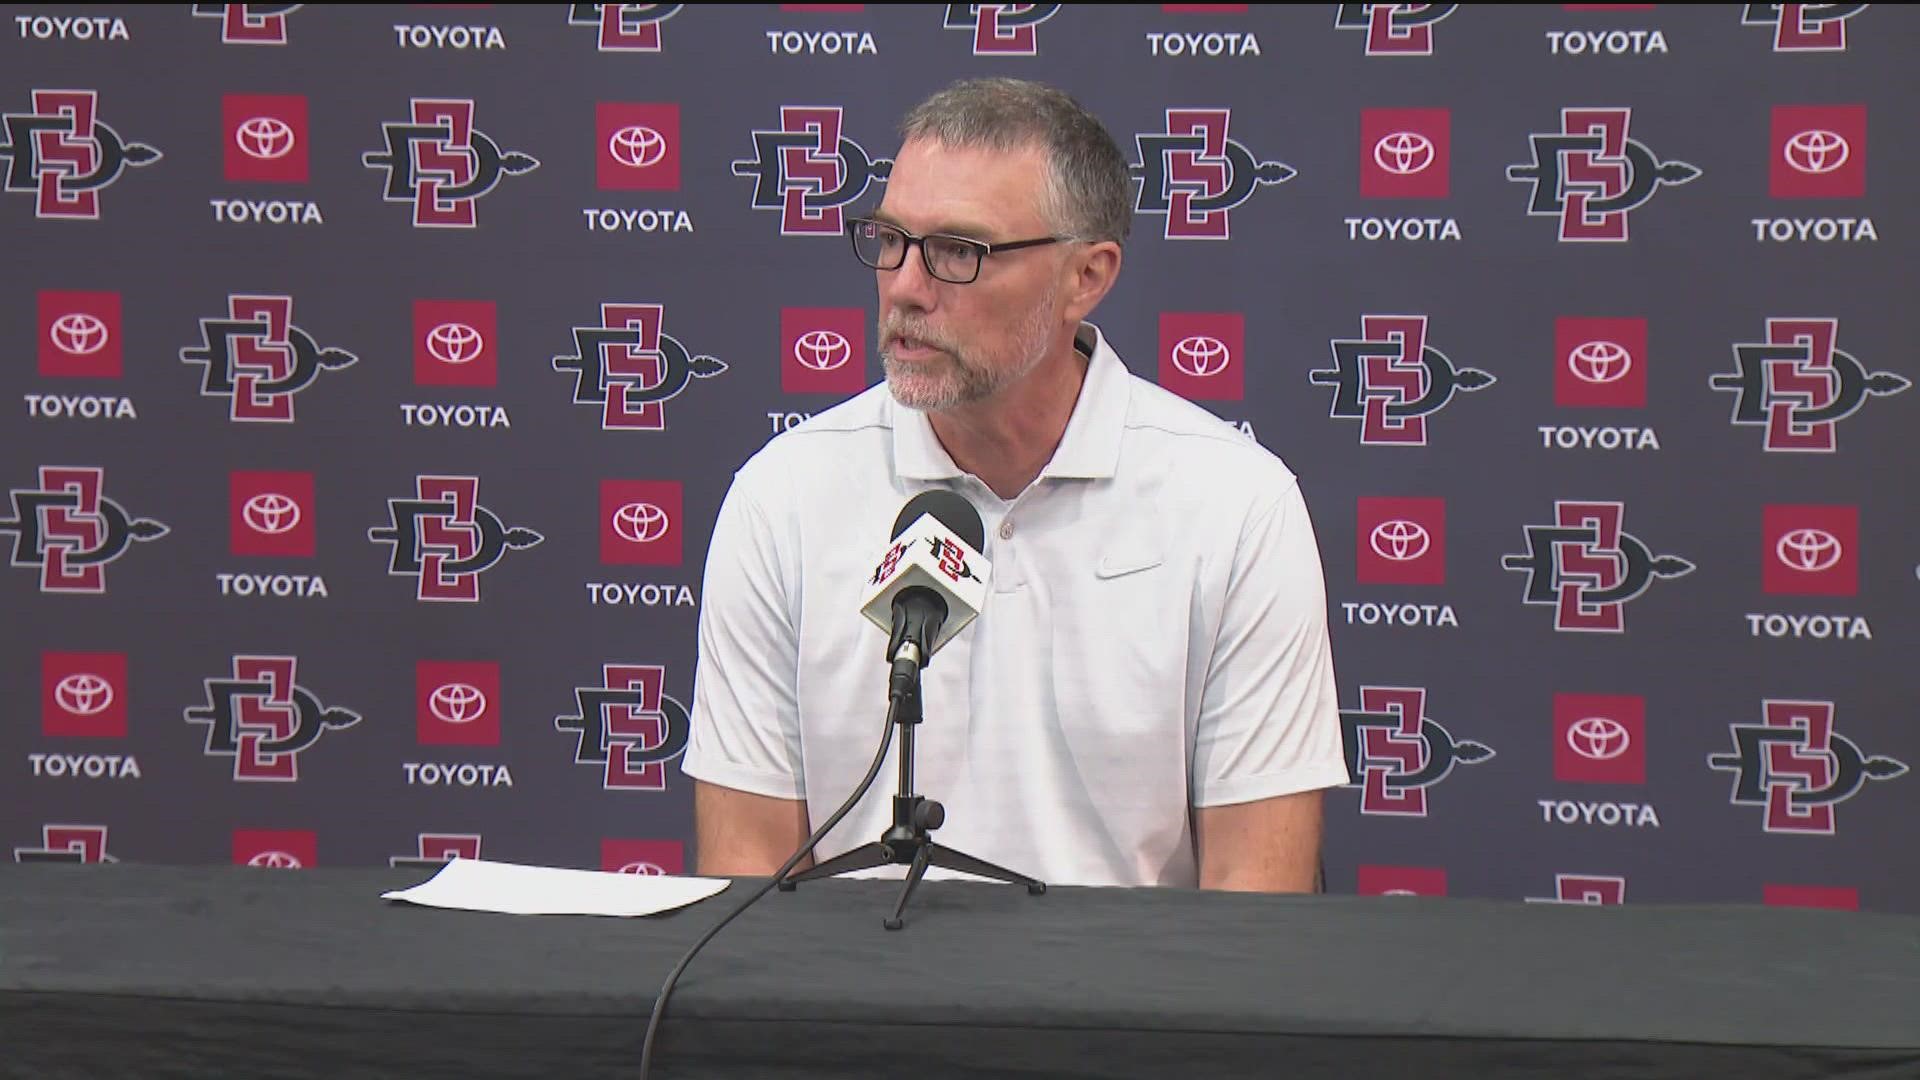 SDSU's home opener resulted in several heat-related medical calls.